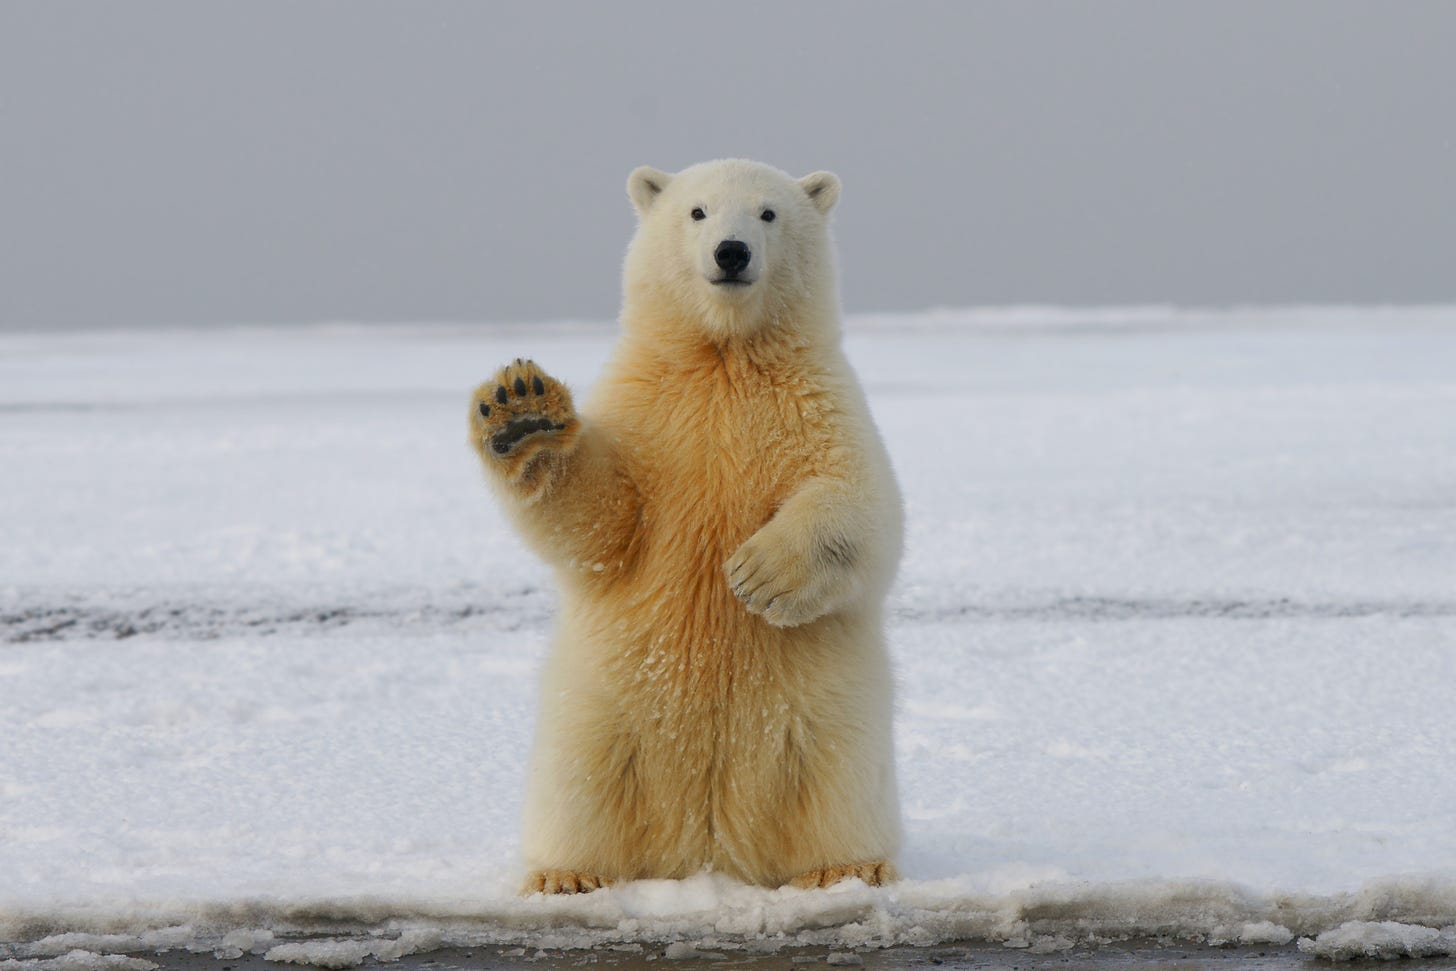 A polar bear sitting on its hind legs holding up one front paw and appearing to be waving hello